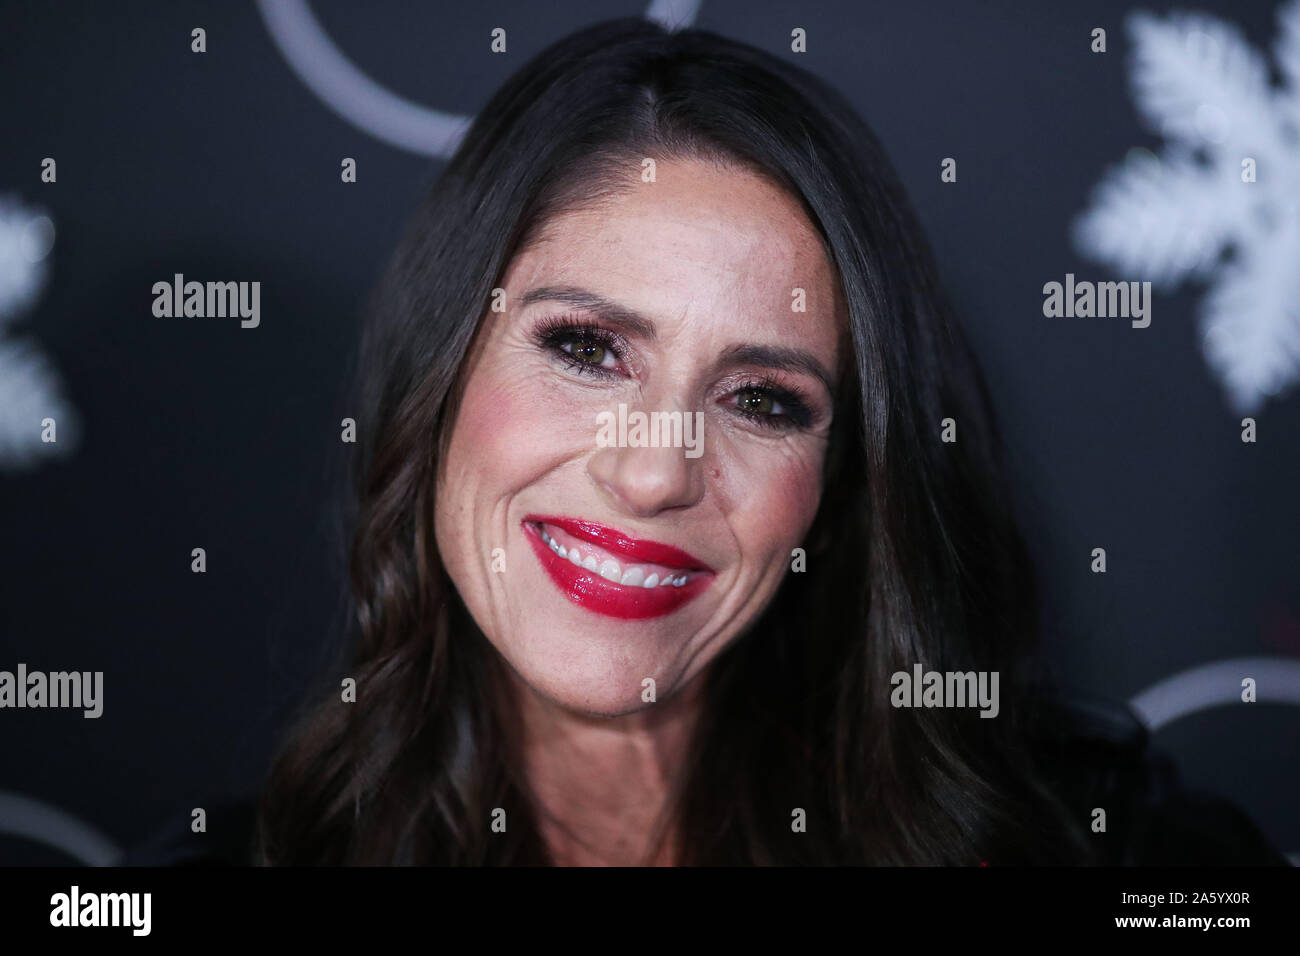 Westwood, United States. 22nd Oct, 2019. WESTWOOD, LOS ANGELES, CALIFORNIA, USA - OCTOBER 22: Actress Soleil Moon Frye arrives at the 'It's A Wonderful Lifetime' Holiday Party held at STK Los Angeles at W Los Angeles - West Beverly Hills on October 22, 2019 in Westwood, Los Angeles, California, United States. (Photo by Xavier Collin/Image Press Agency) Credit: Image Press Agency/Alamy Live News Stock Photo